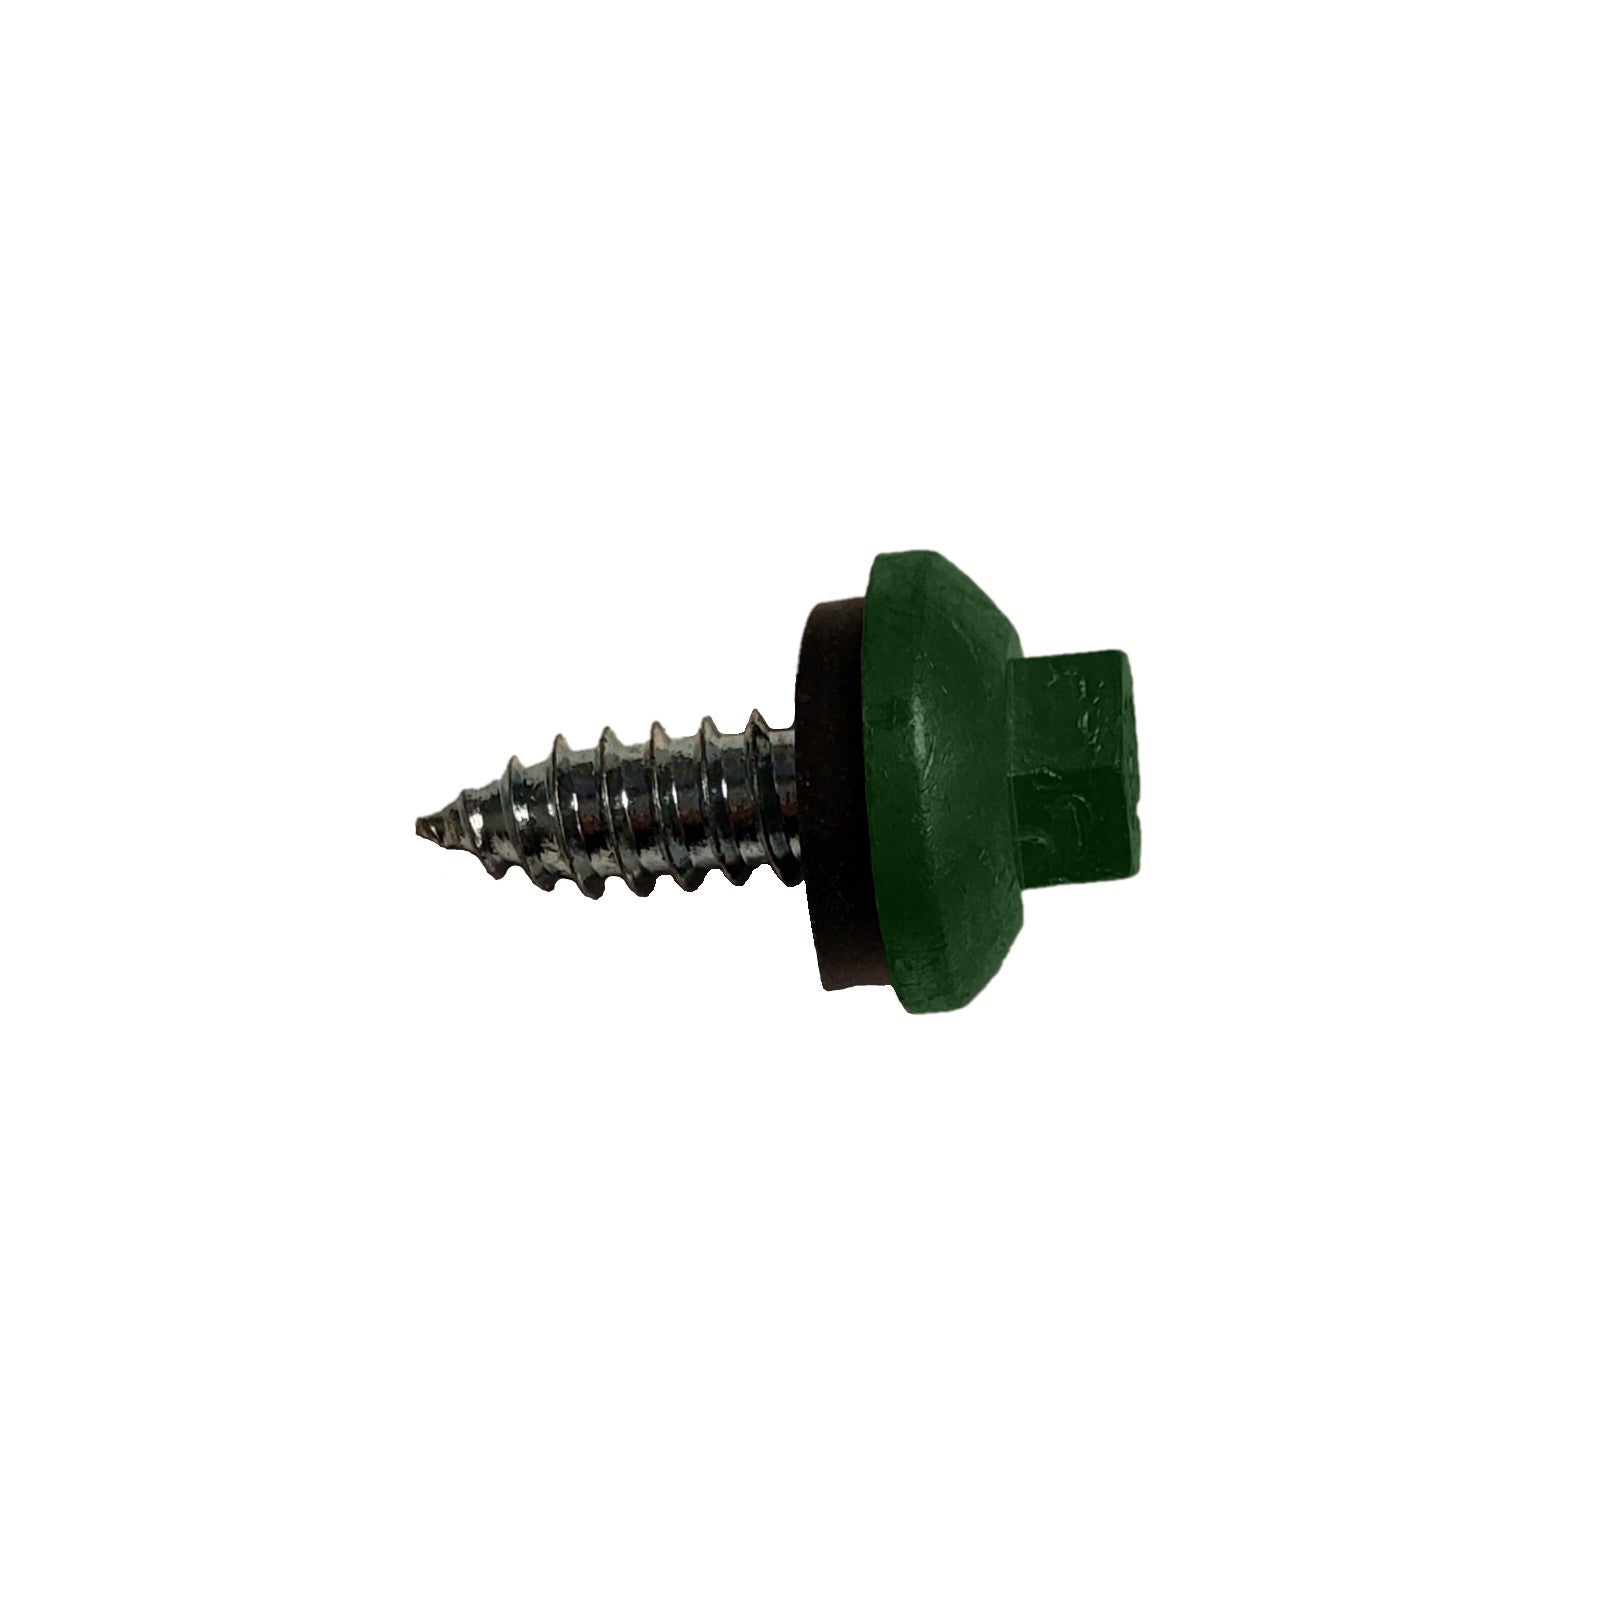 #14 x 34 inch ZXL Tapping Steelbinder Metal Roofing Screw Forest Green Pkg 250